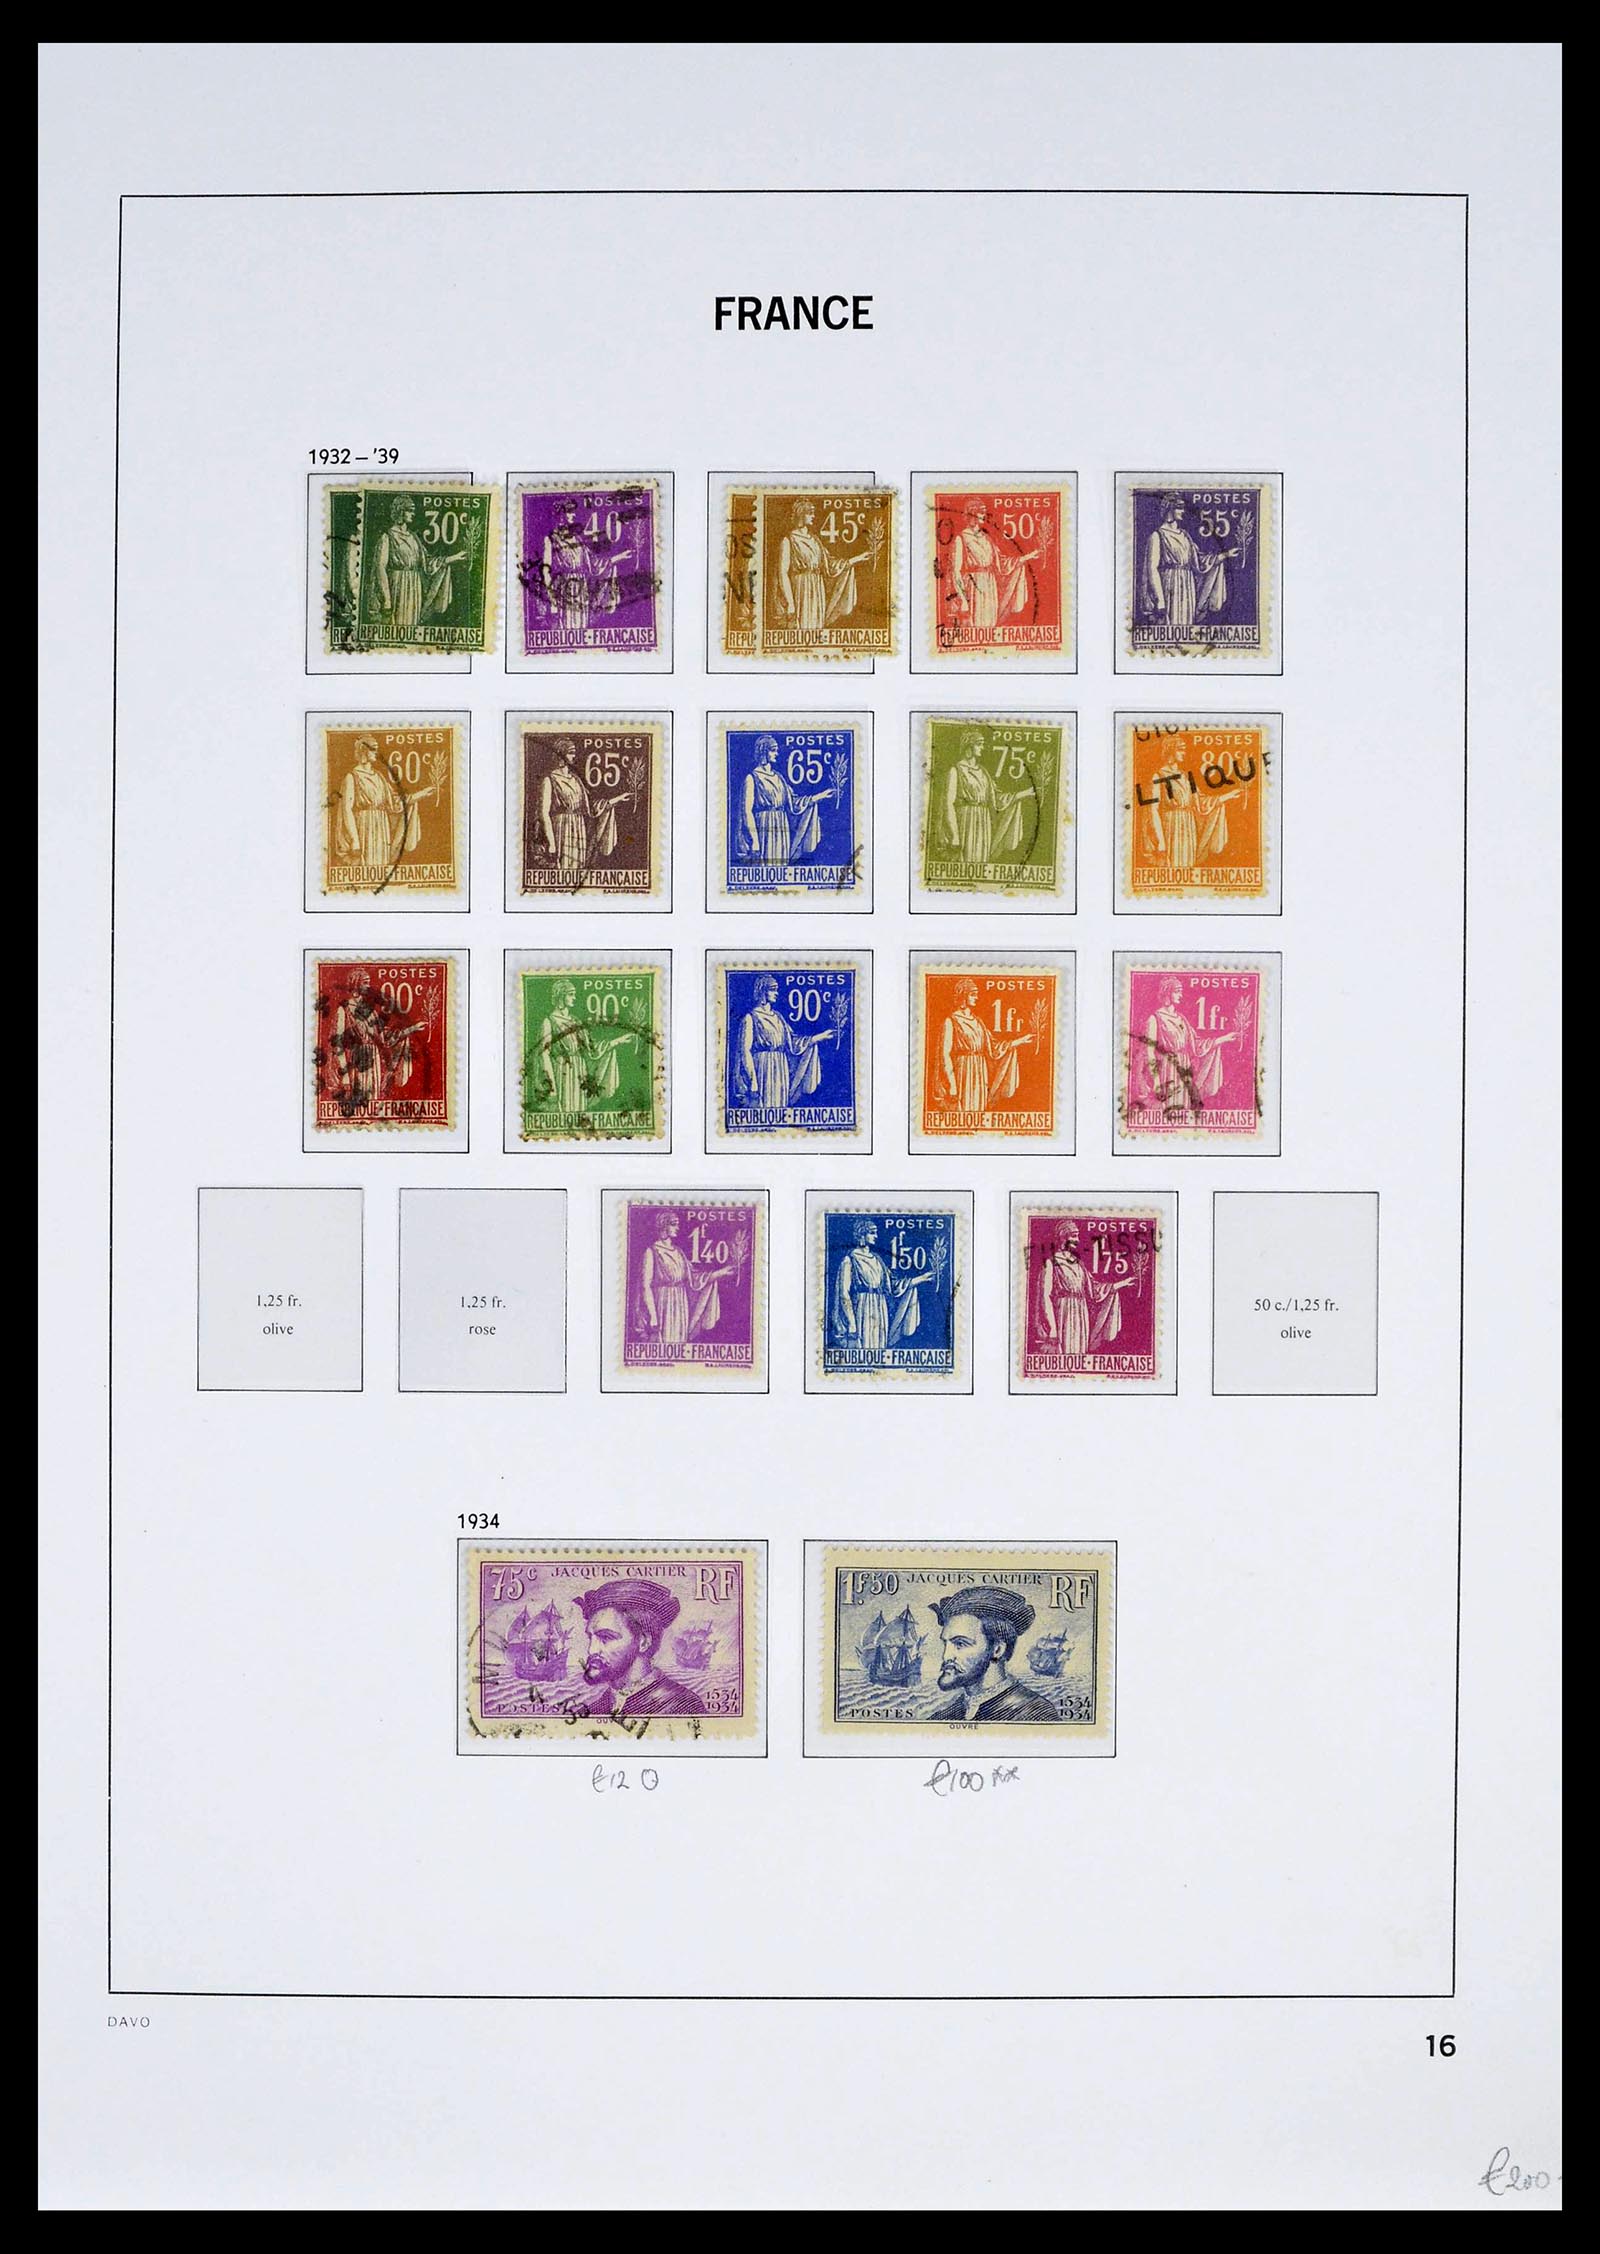 39335 0031 - Stamp collection 39335 France 1849-1969.